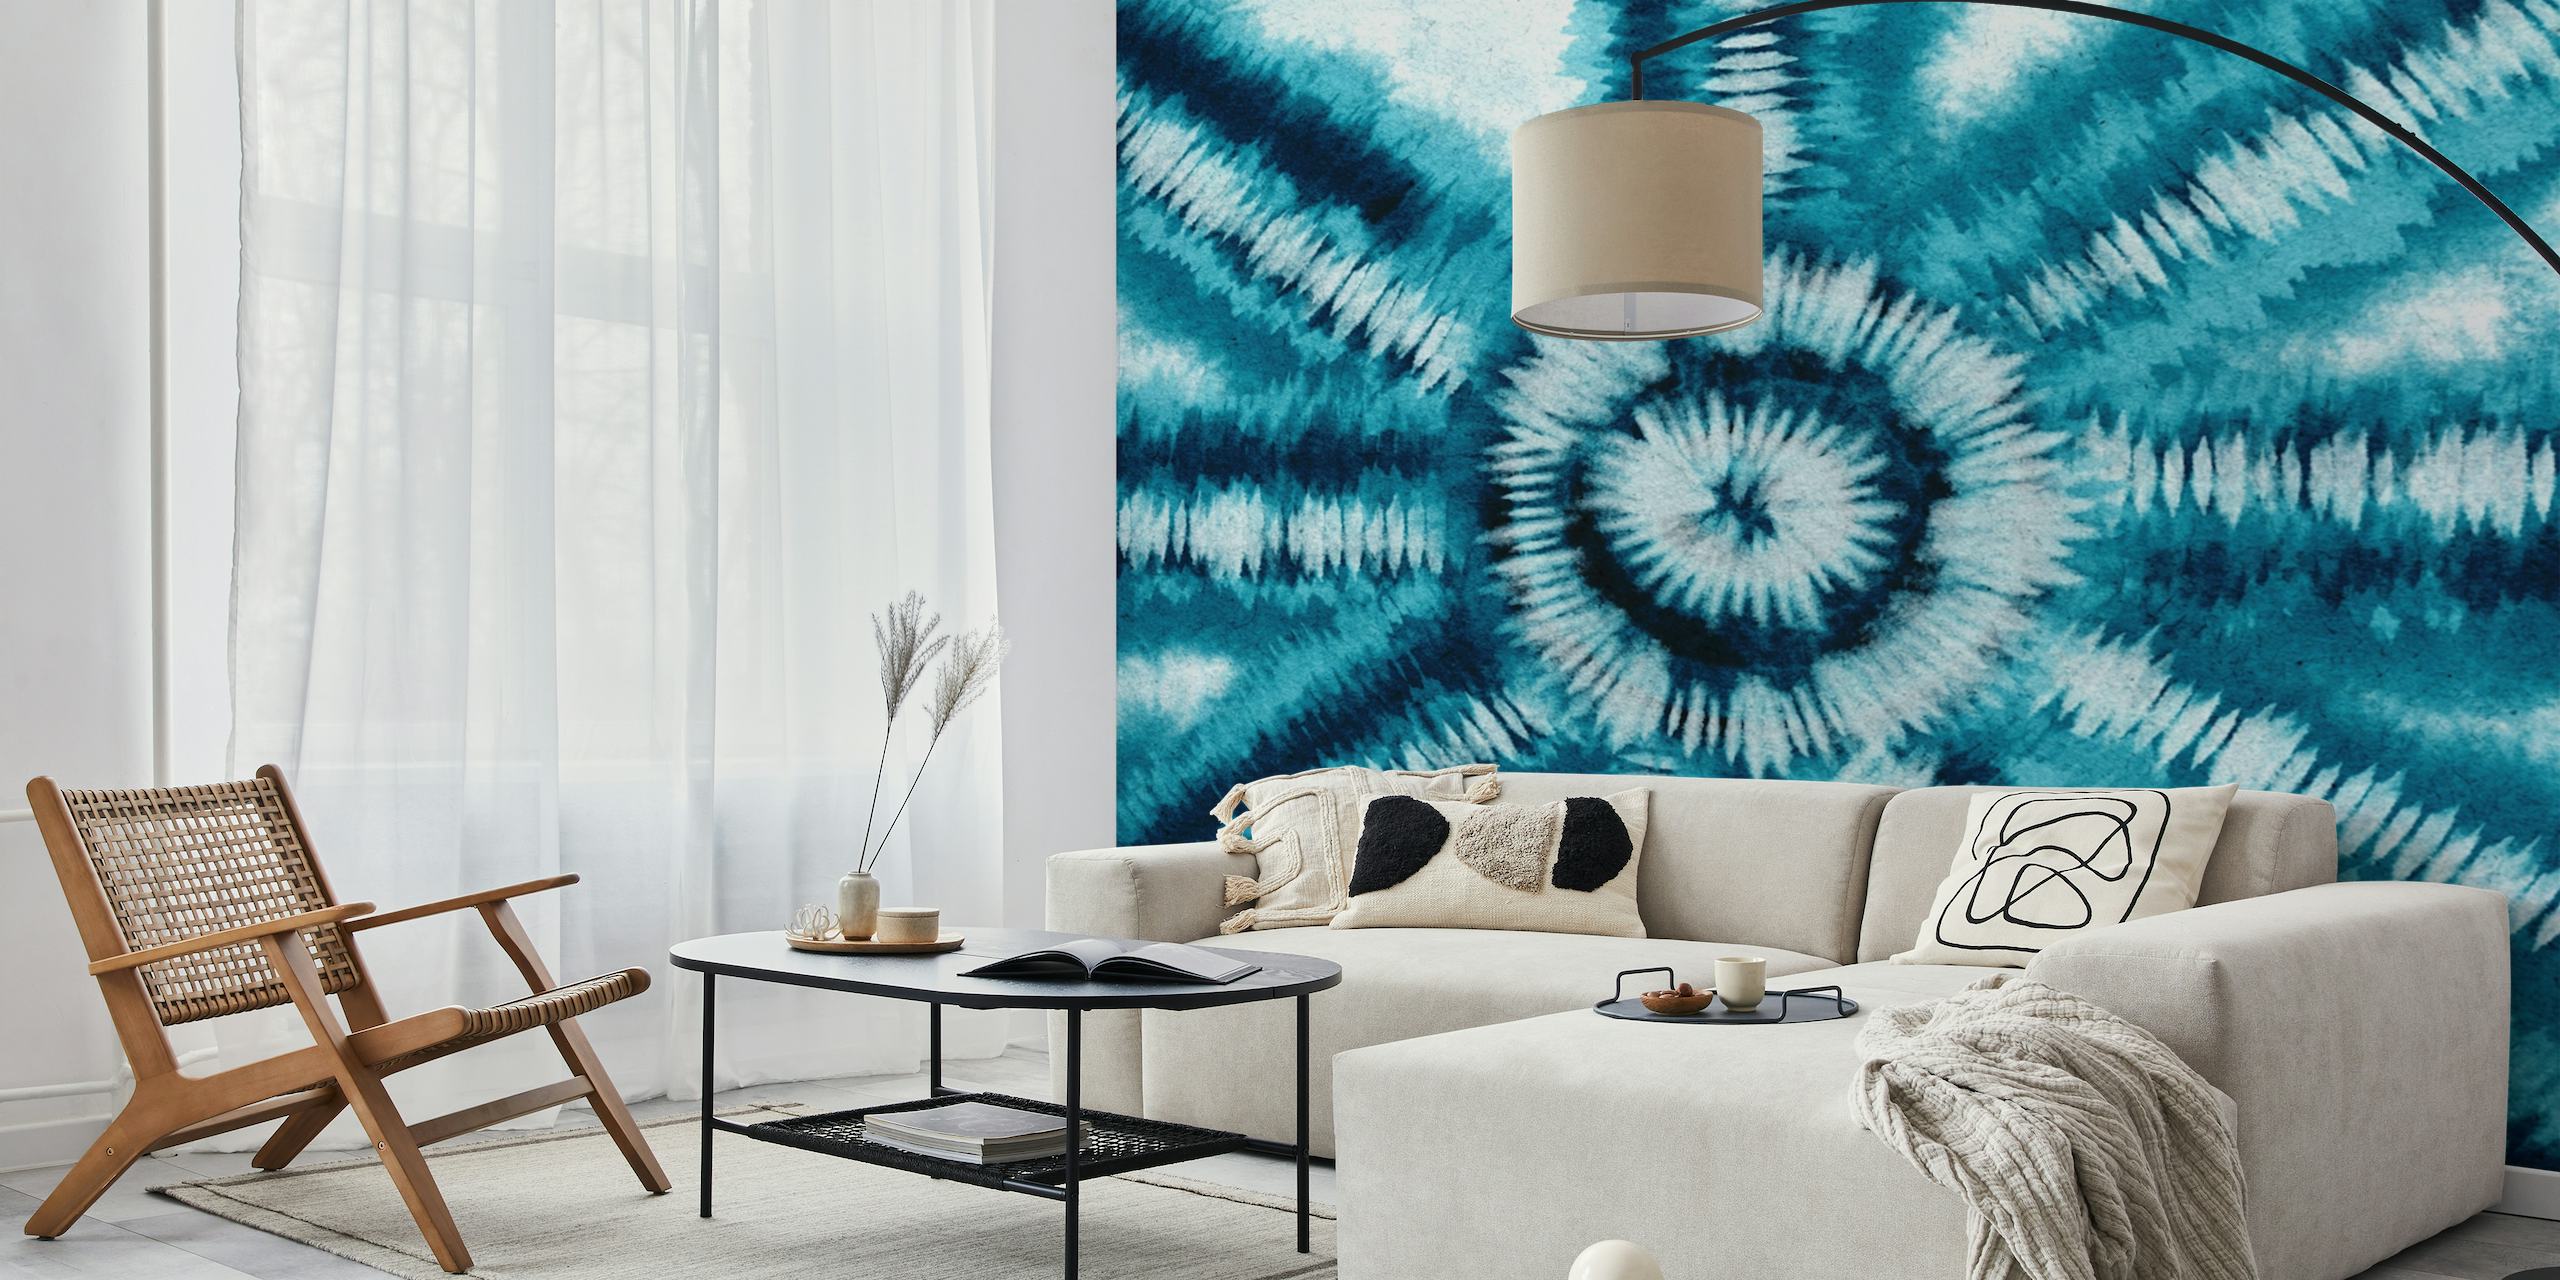 Tie Dye Background 6 wall mural with gradient blues and concentric patterns